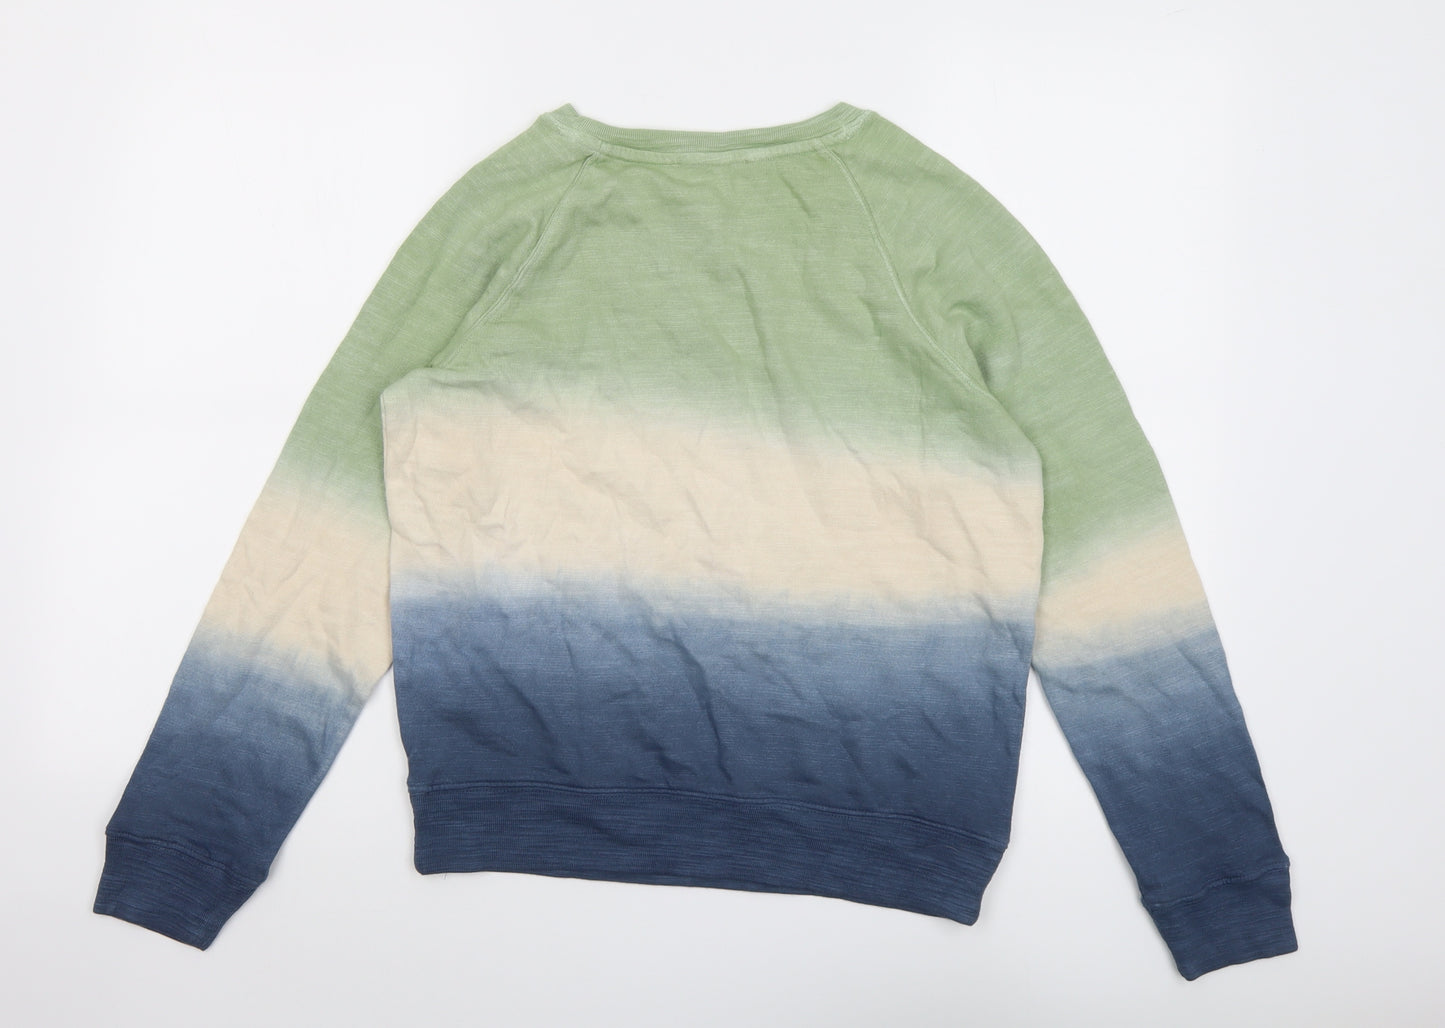 Marks and Spencer Womens Multicoloured Colourblock Cotton Pullover Sweatshirt Size 8 Pullover - Ombre effect